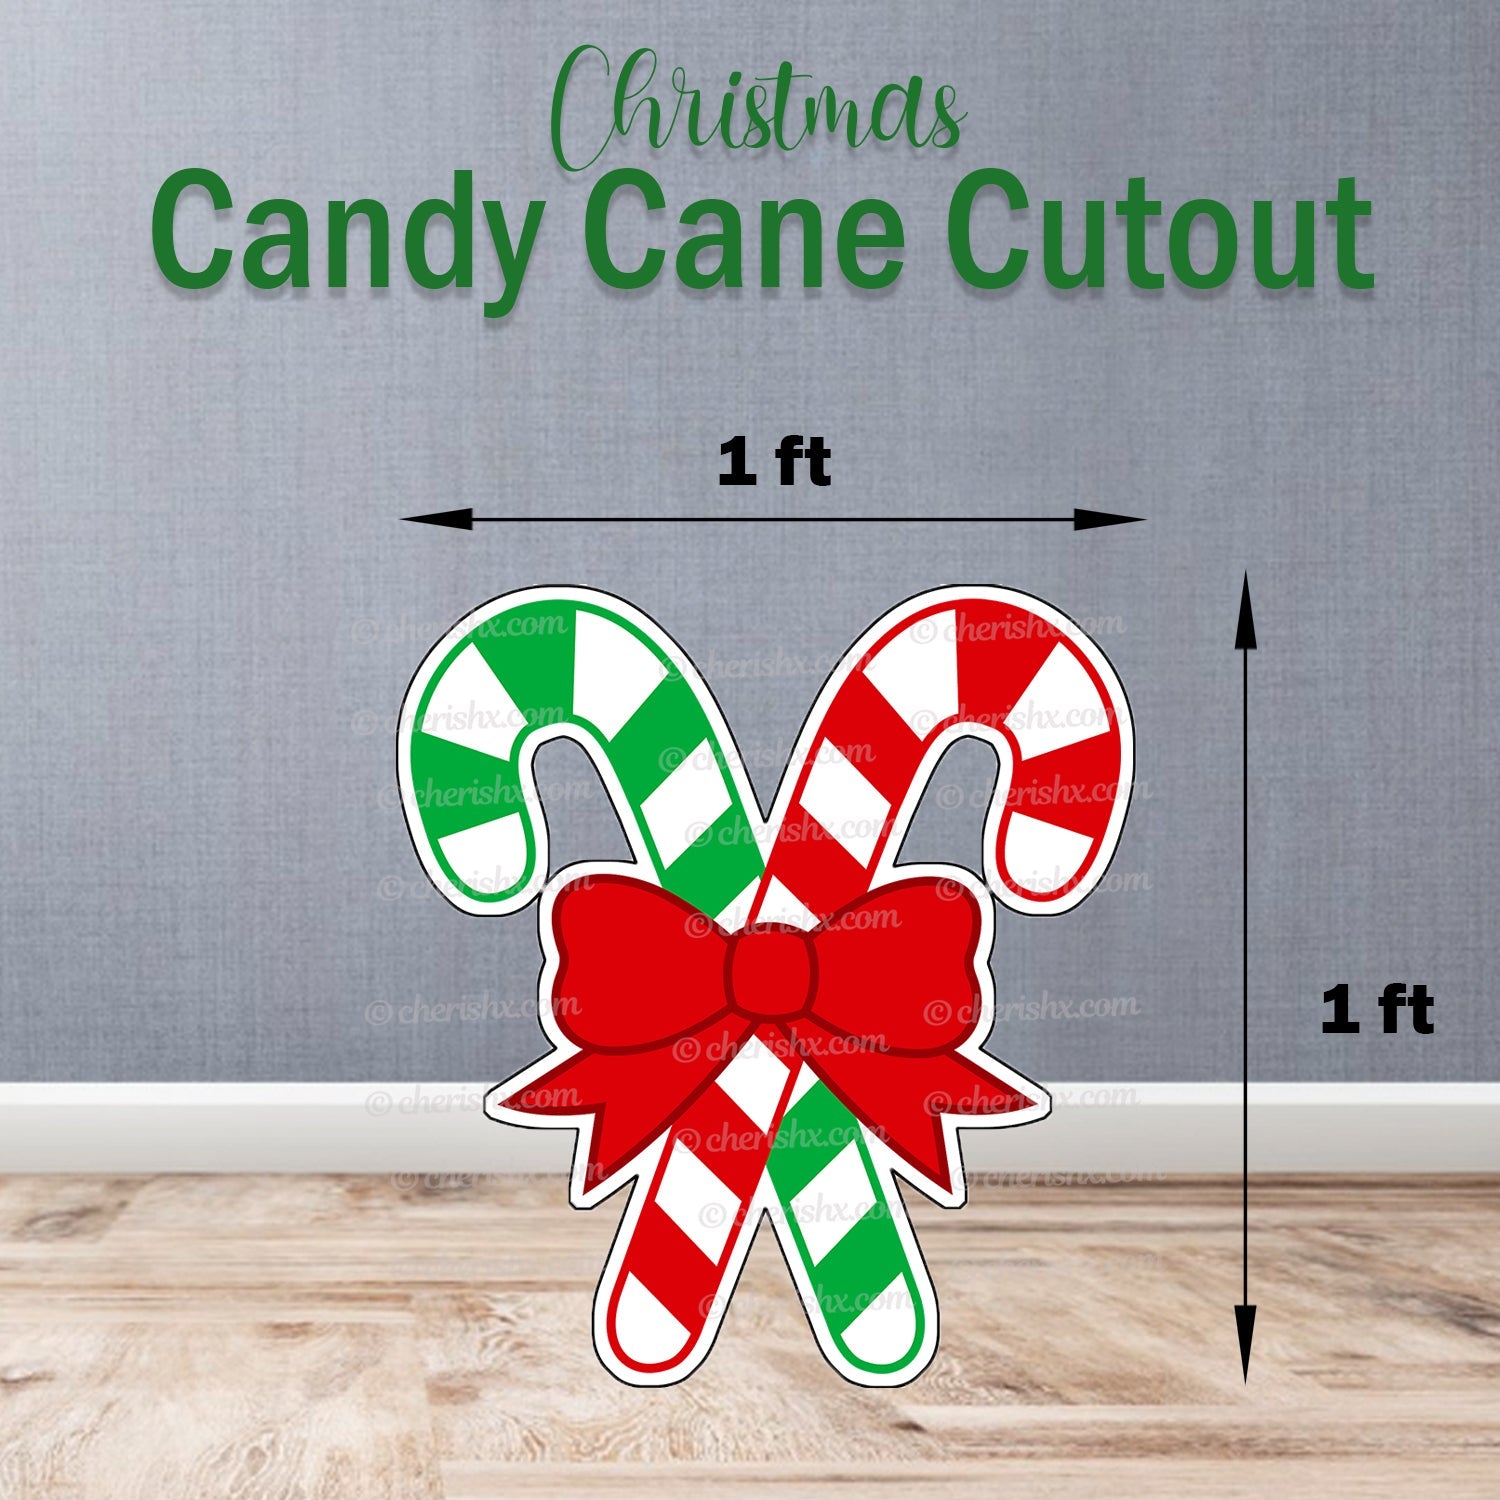 Christmas Theme Party Cutout - Candy Cane - CherishX Partystore